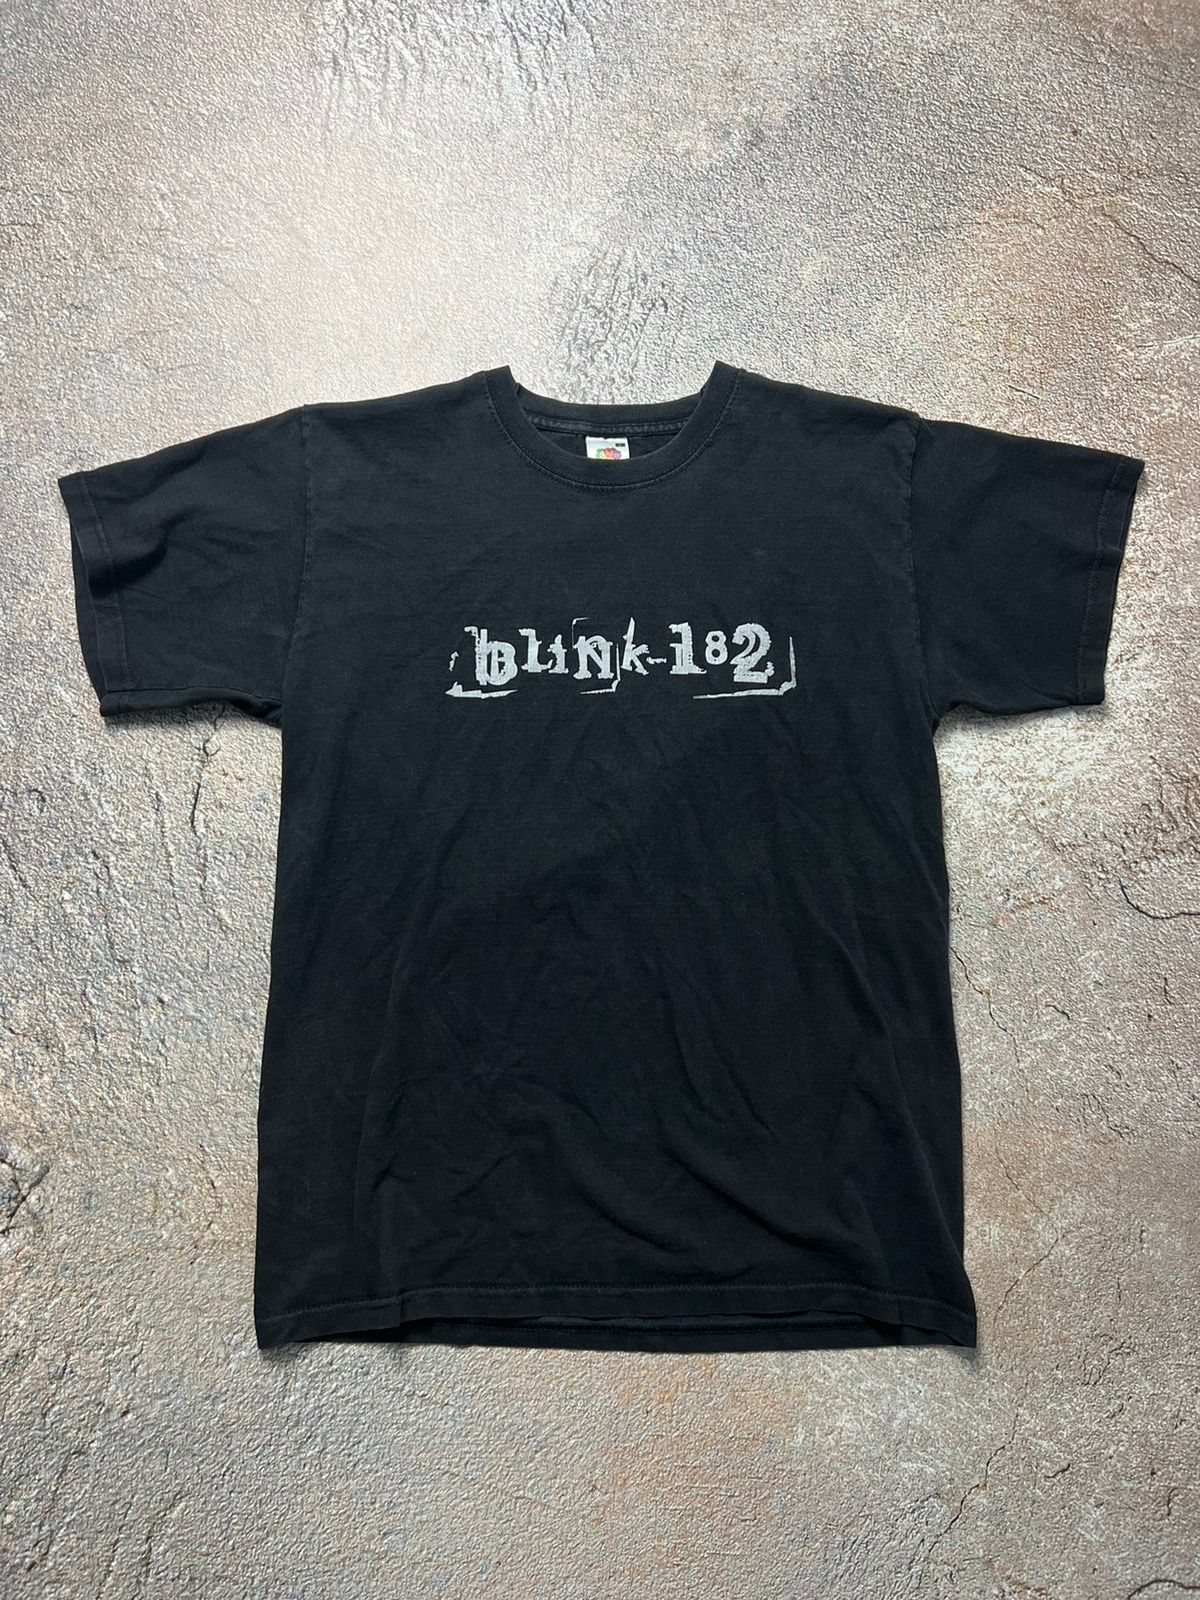 Pre-owned Band Tees X Rock Band 00s Vintage Blink 182 Washed Pop Y2k Punk Rock Band Tee In Washed Black